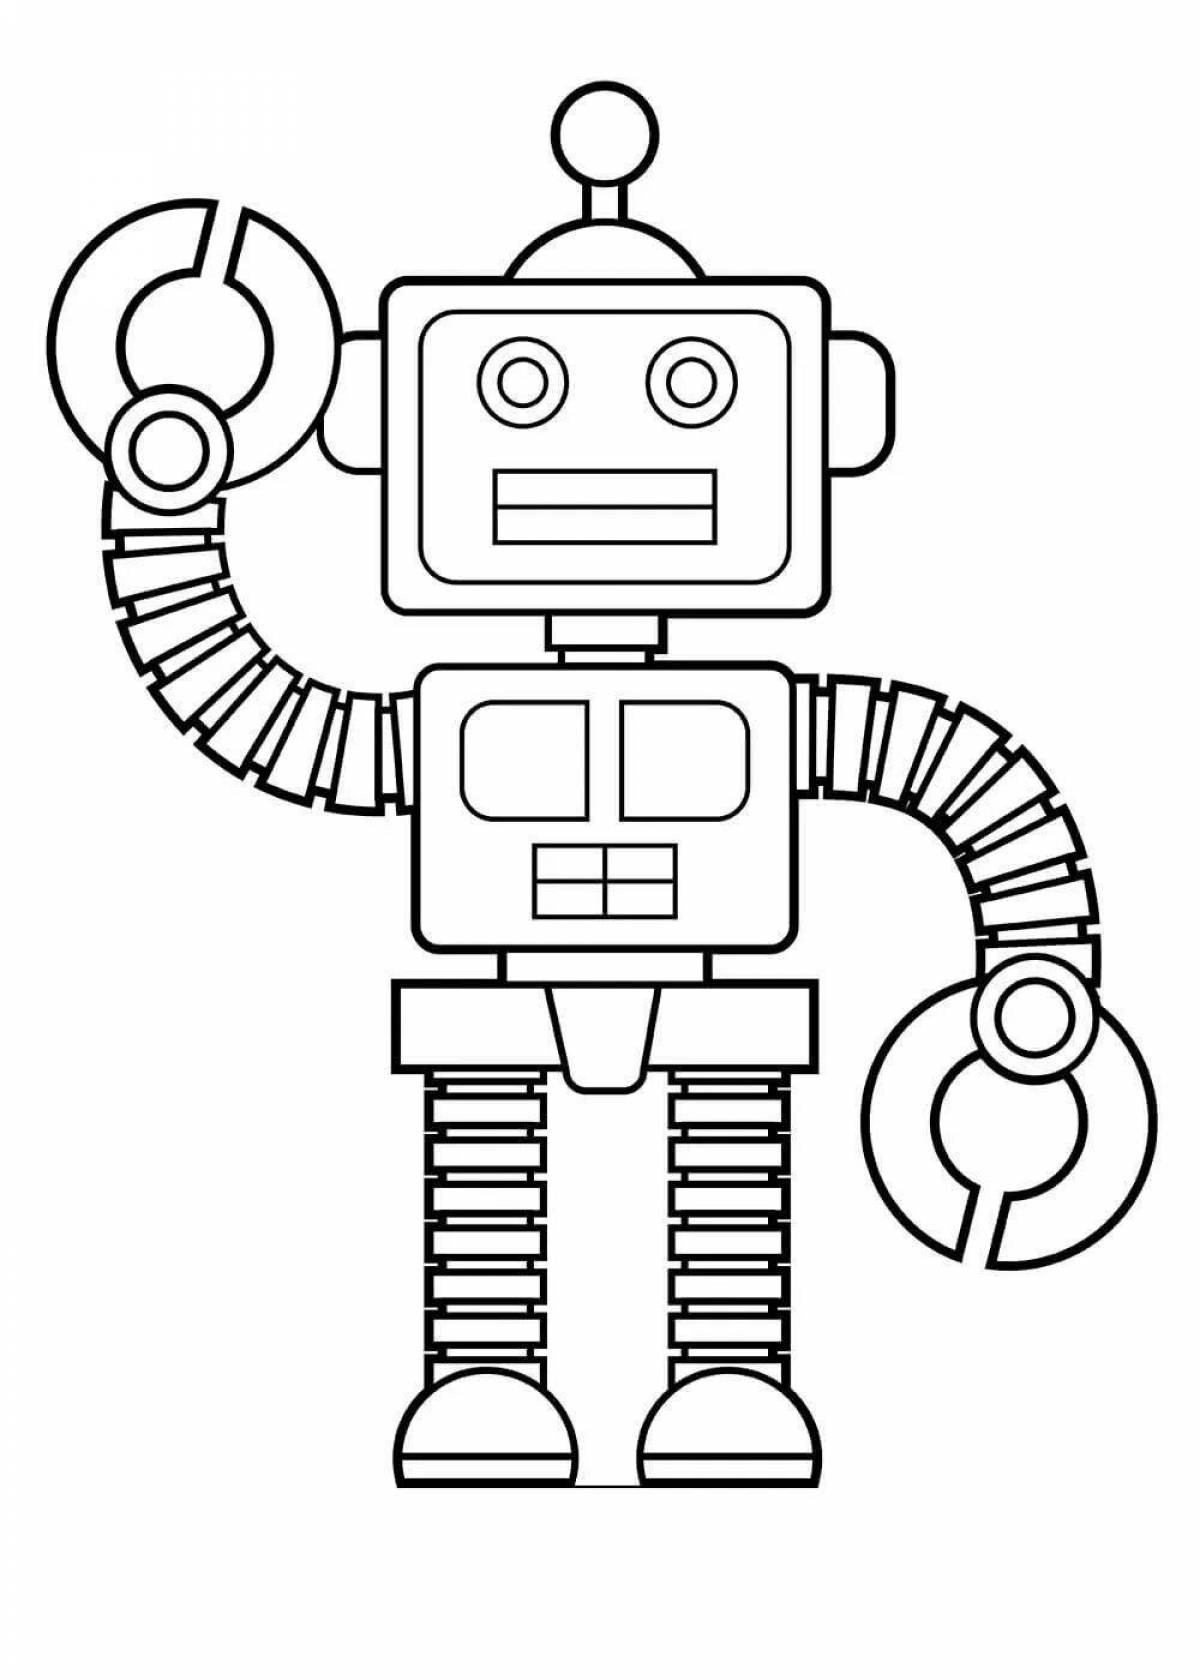 Colorful robot teacher coloring page